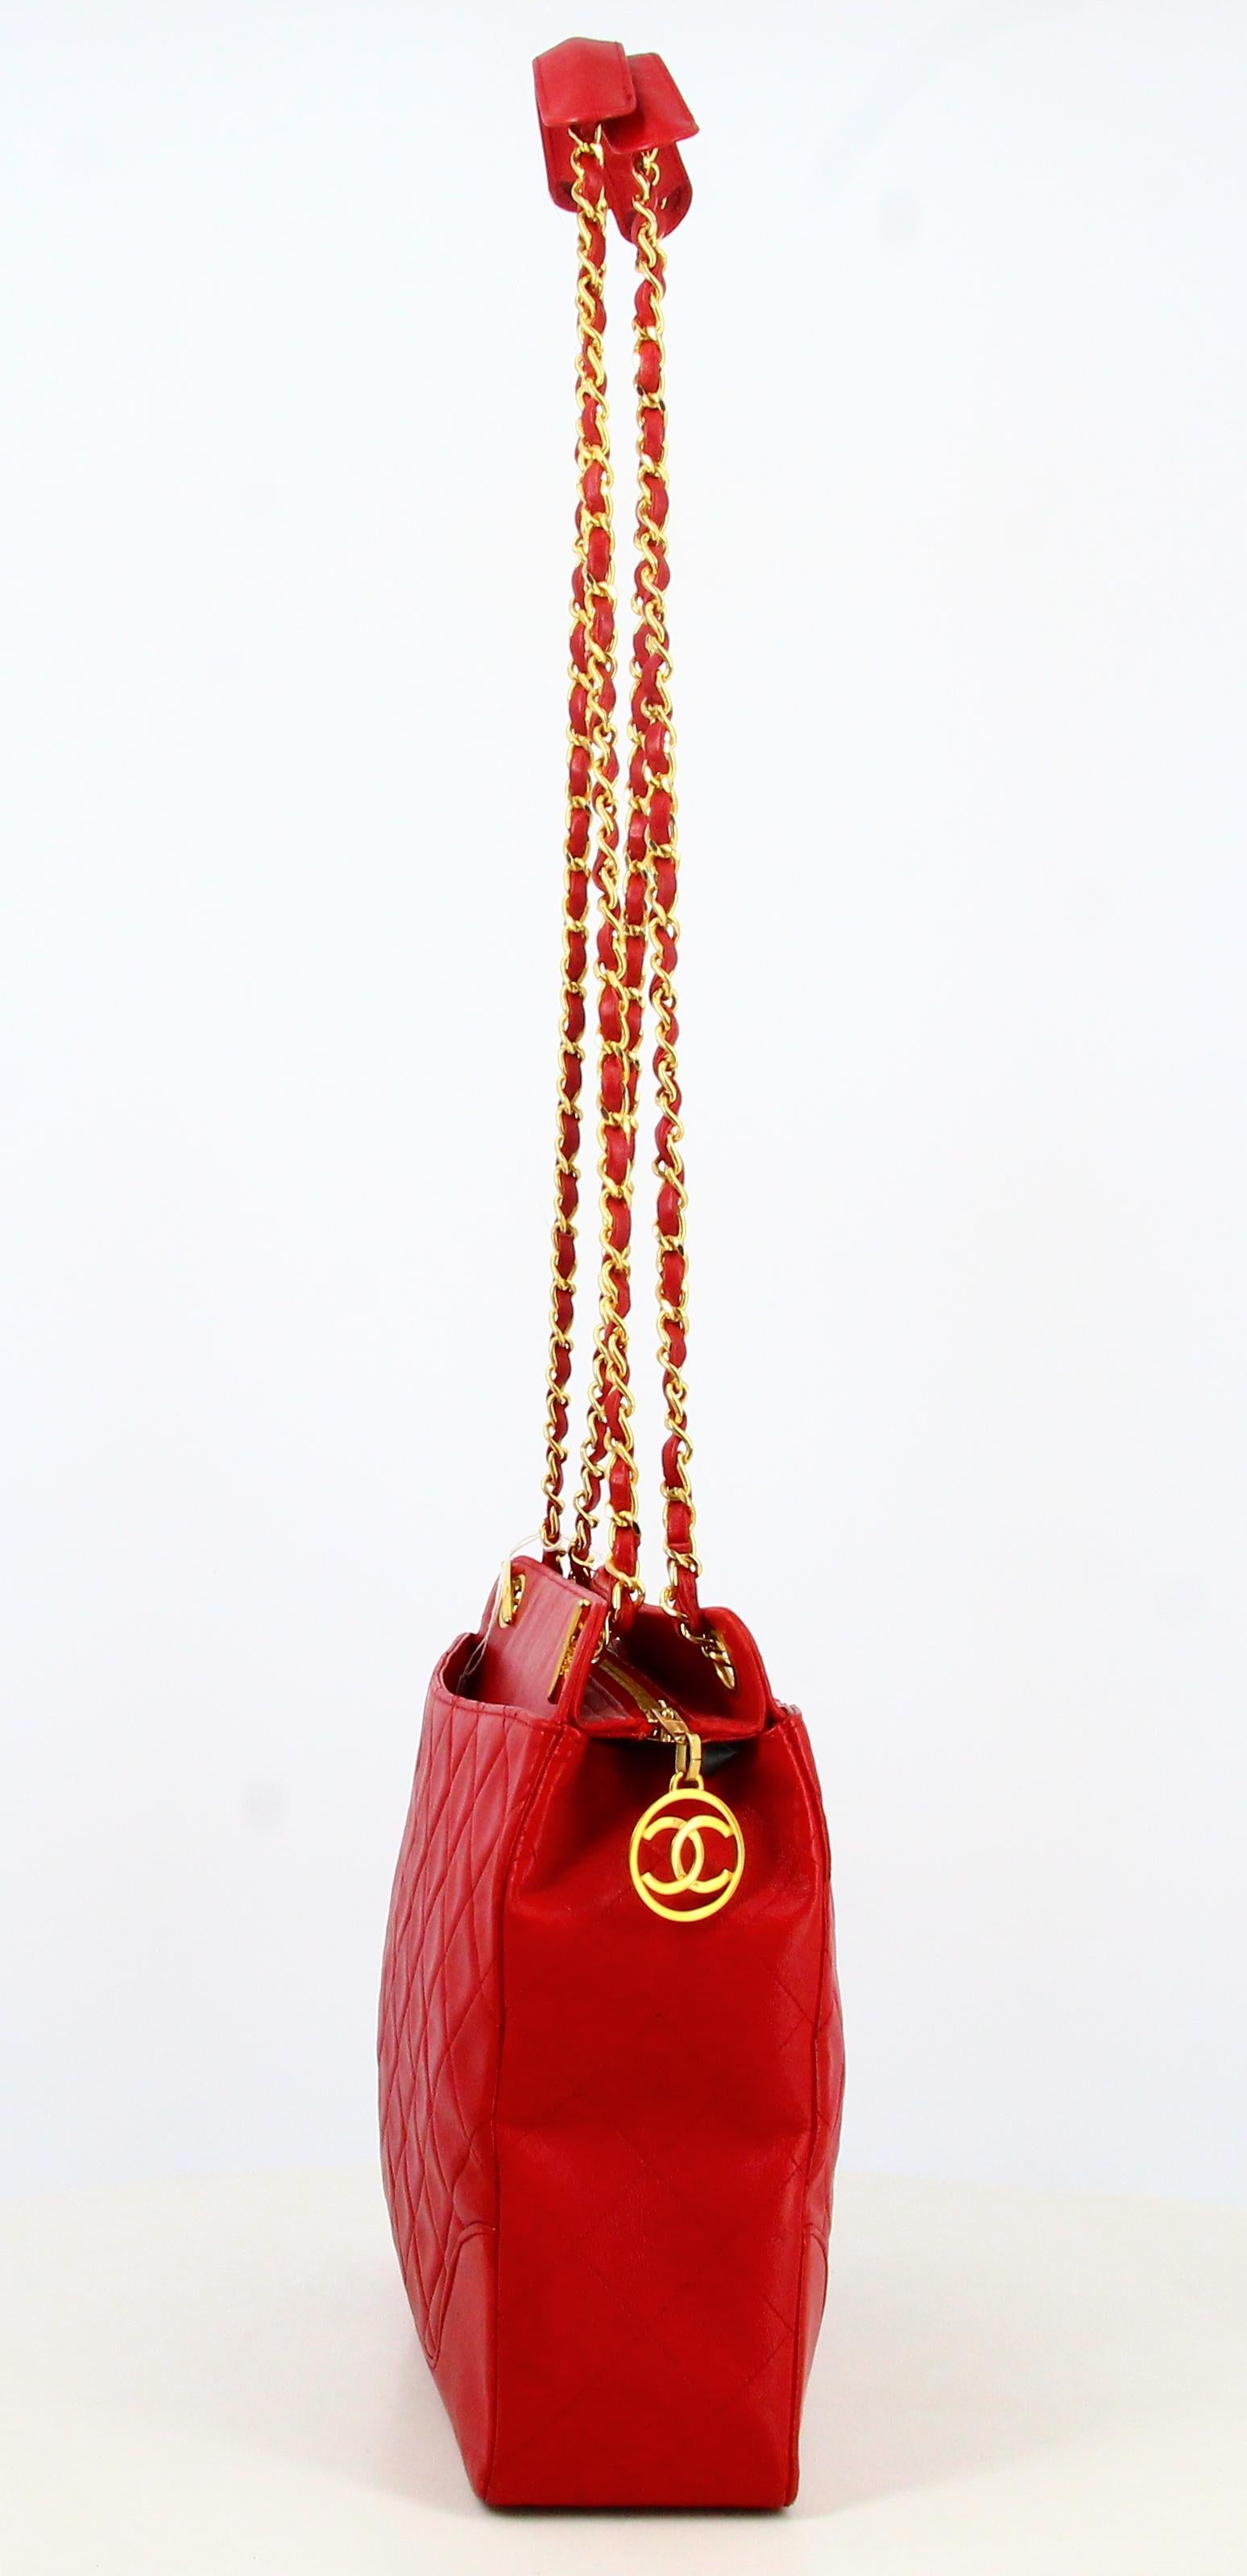 Women's 1989 Handbag Chanel quilted leather Red 